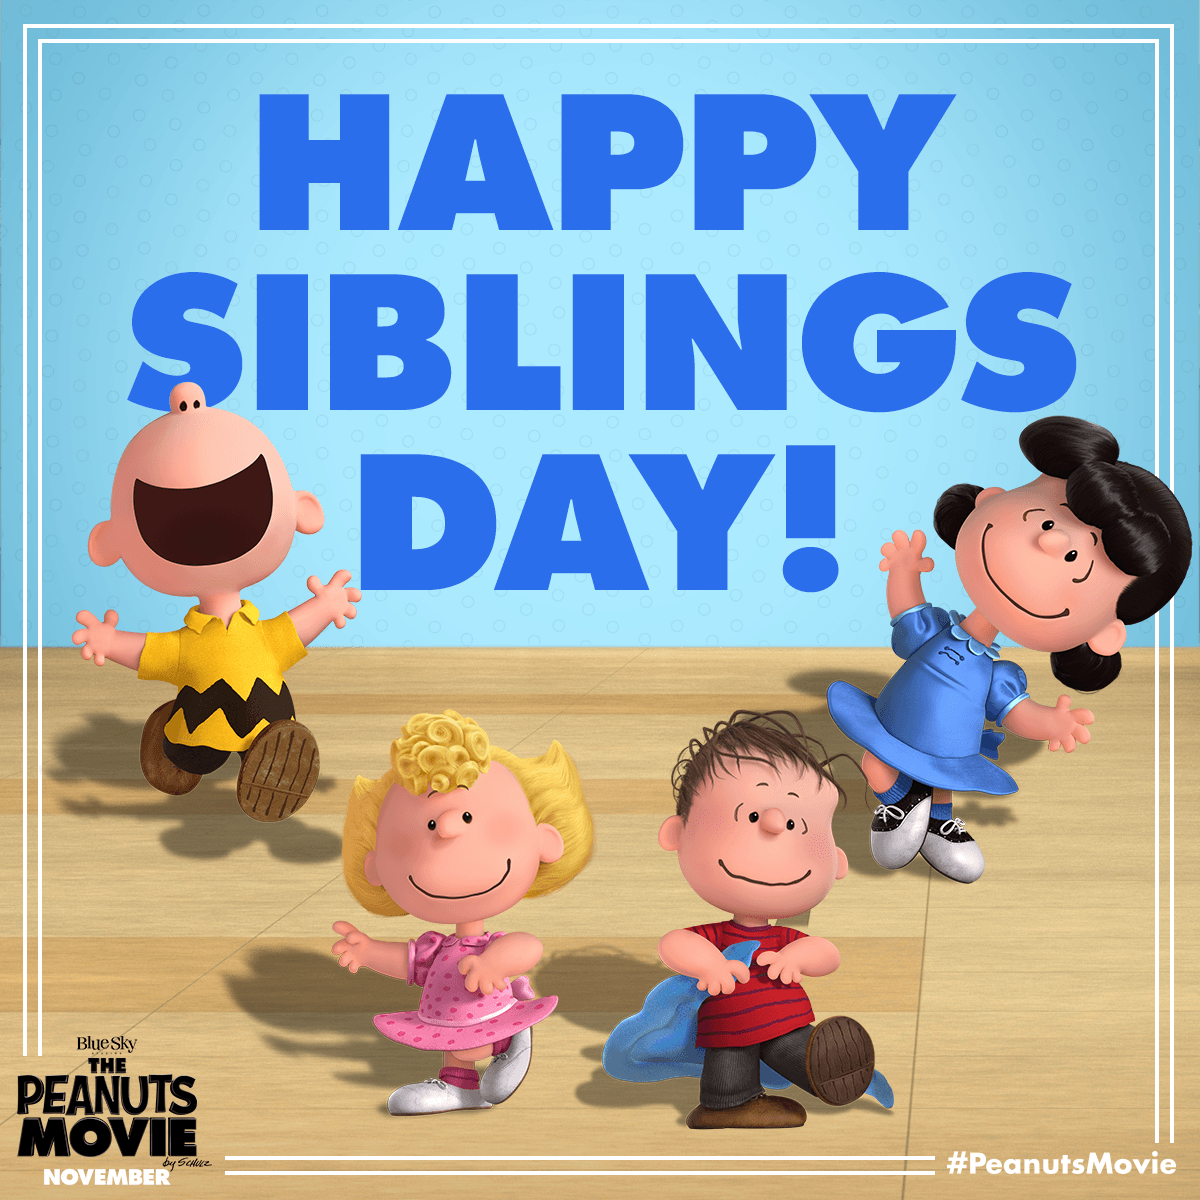 Oh brother! Happy National Siblings Day from The Peanuts Movie